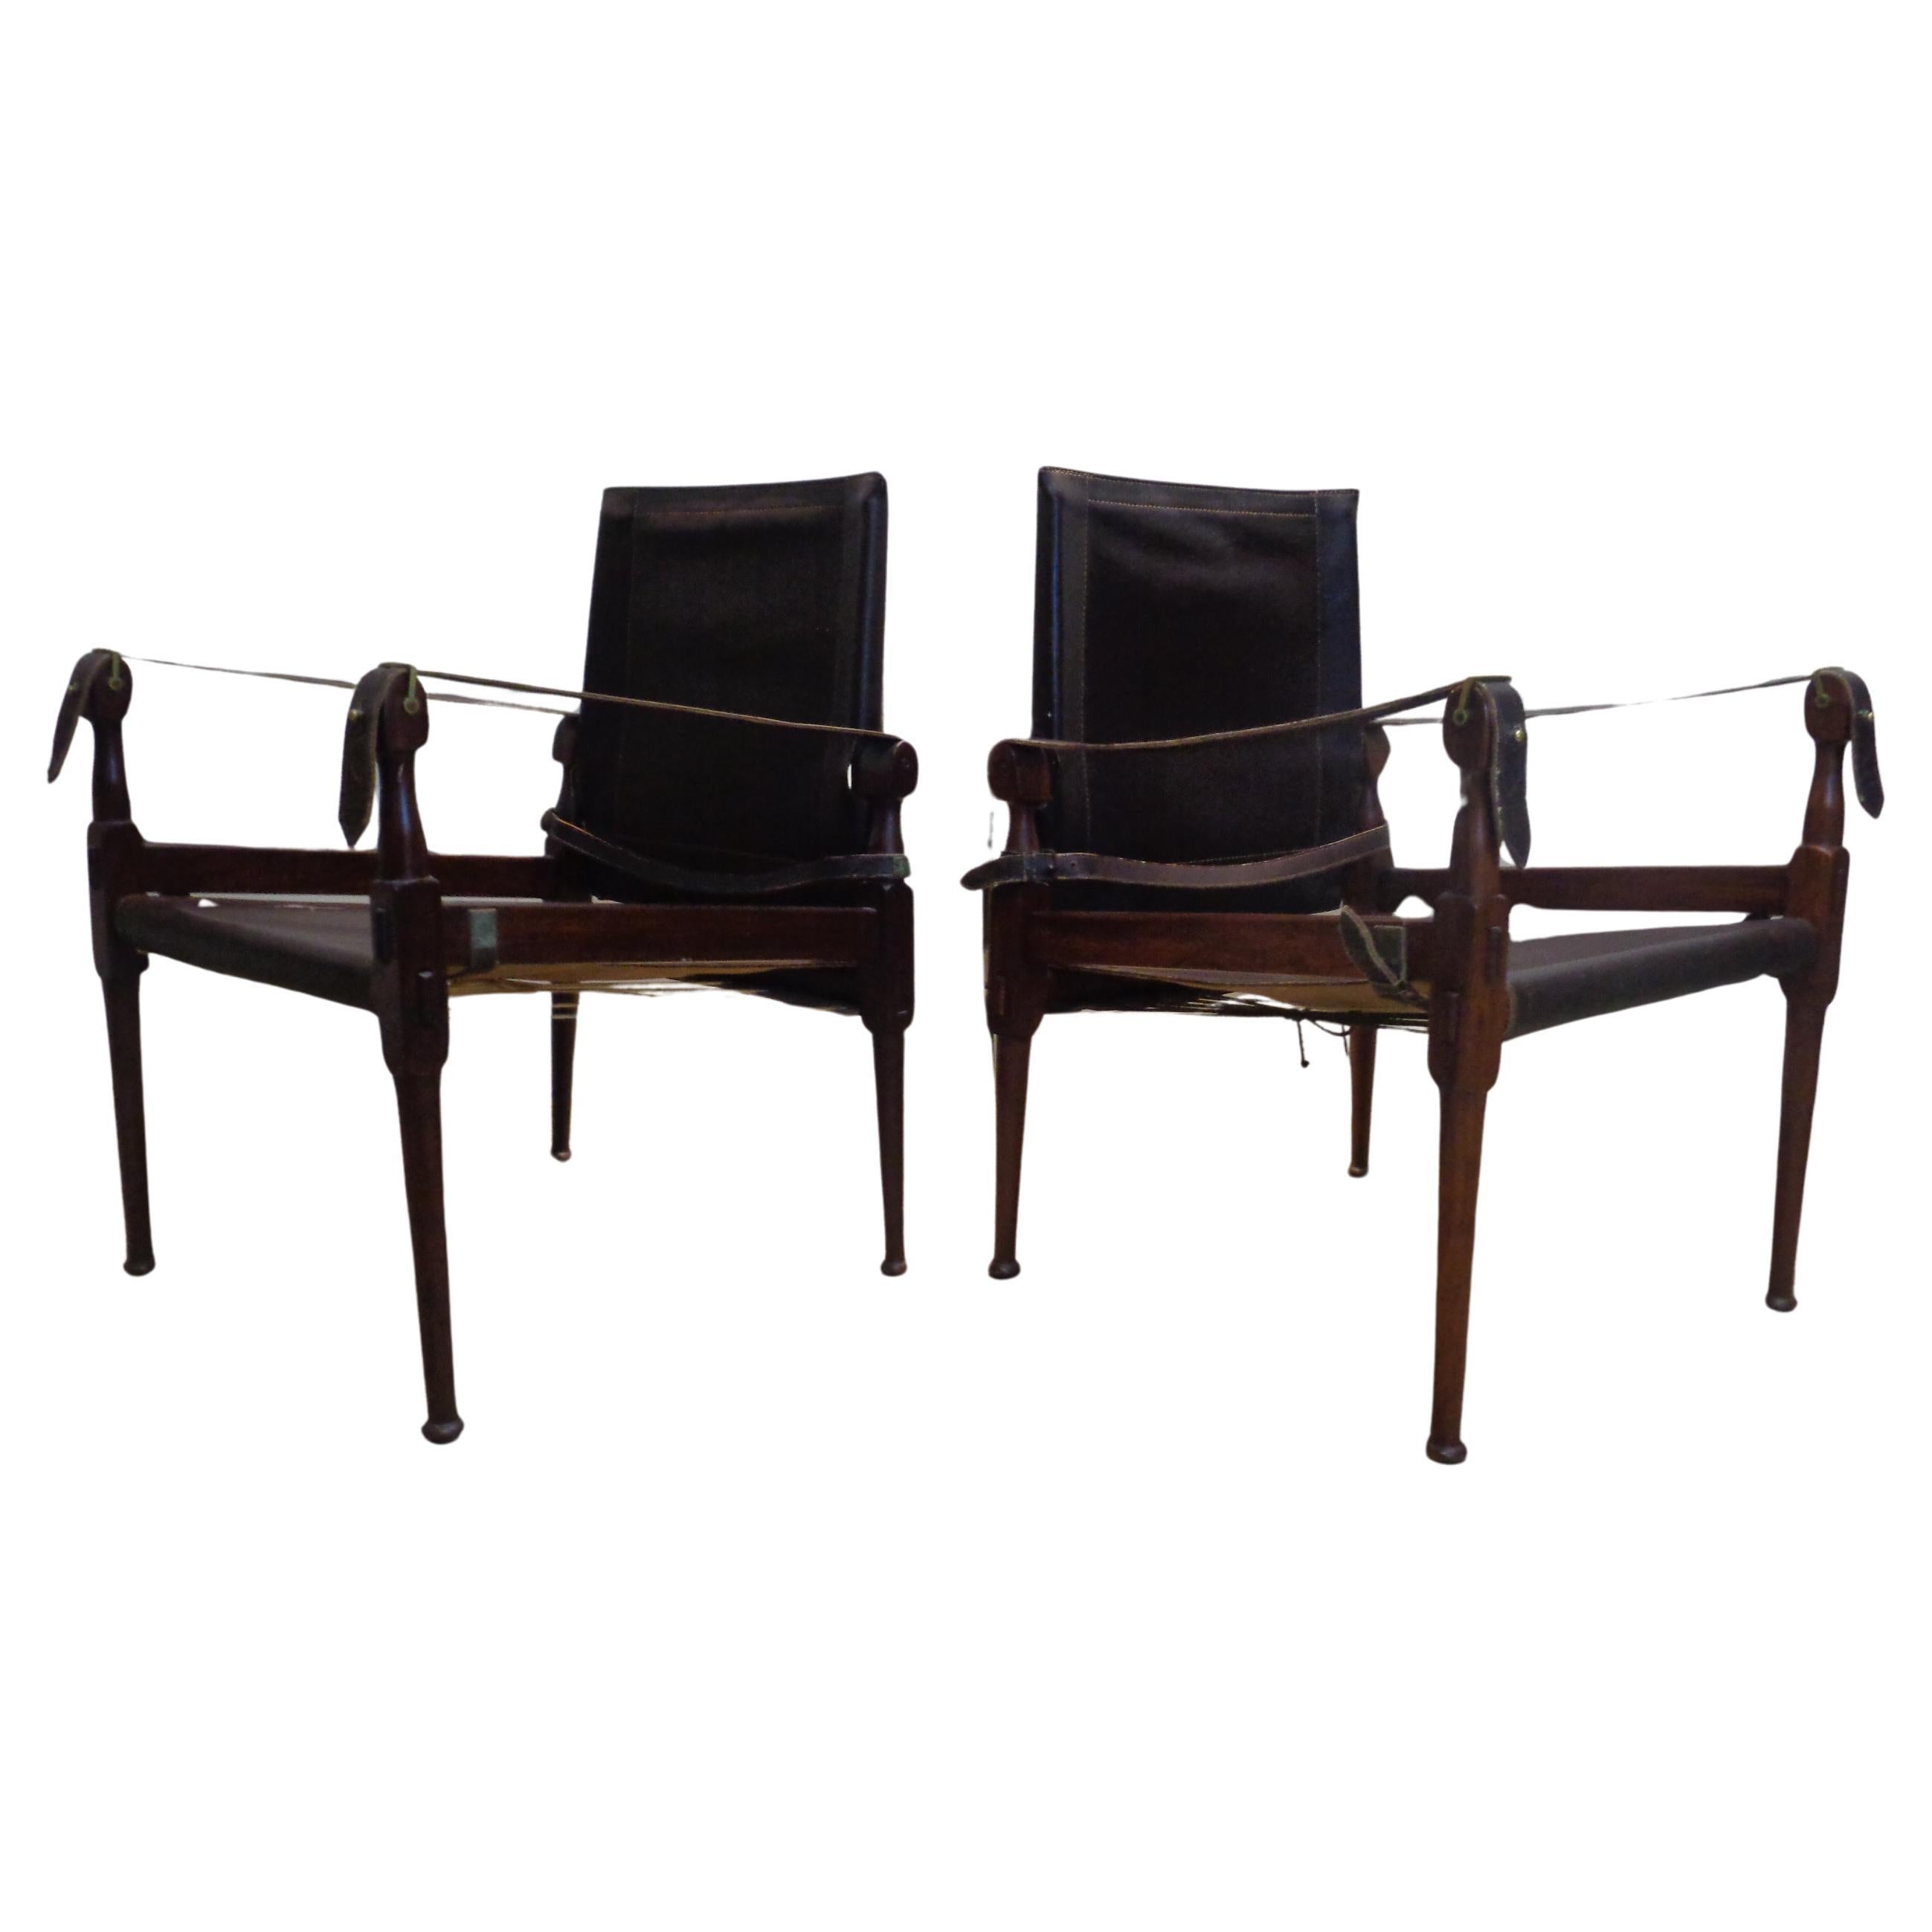 20th Century  Campaign Style Safari Chairs, M. Hayat & Bros. 1960-1970 For Sale